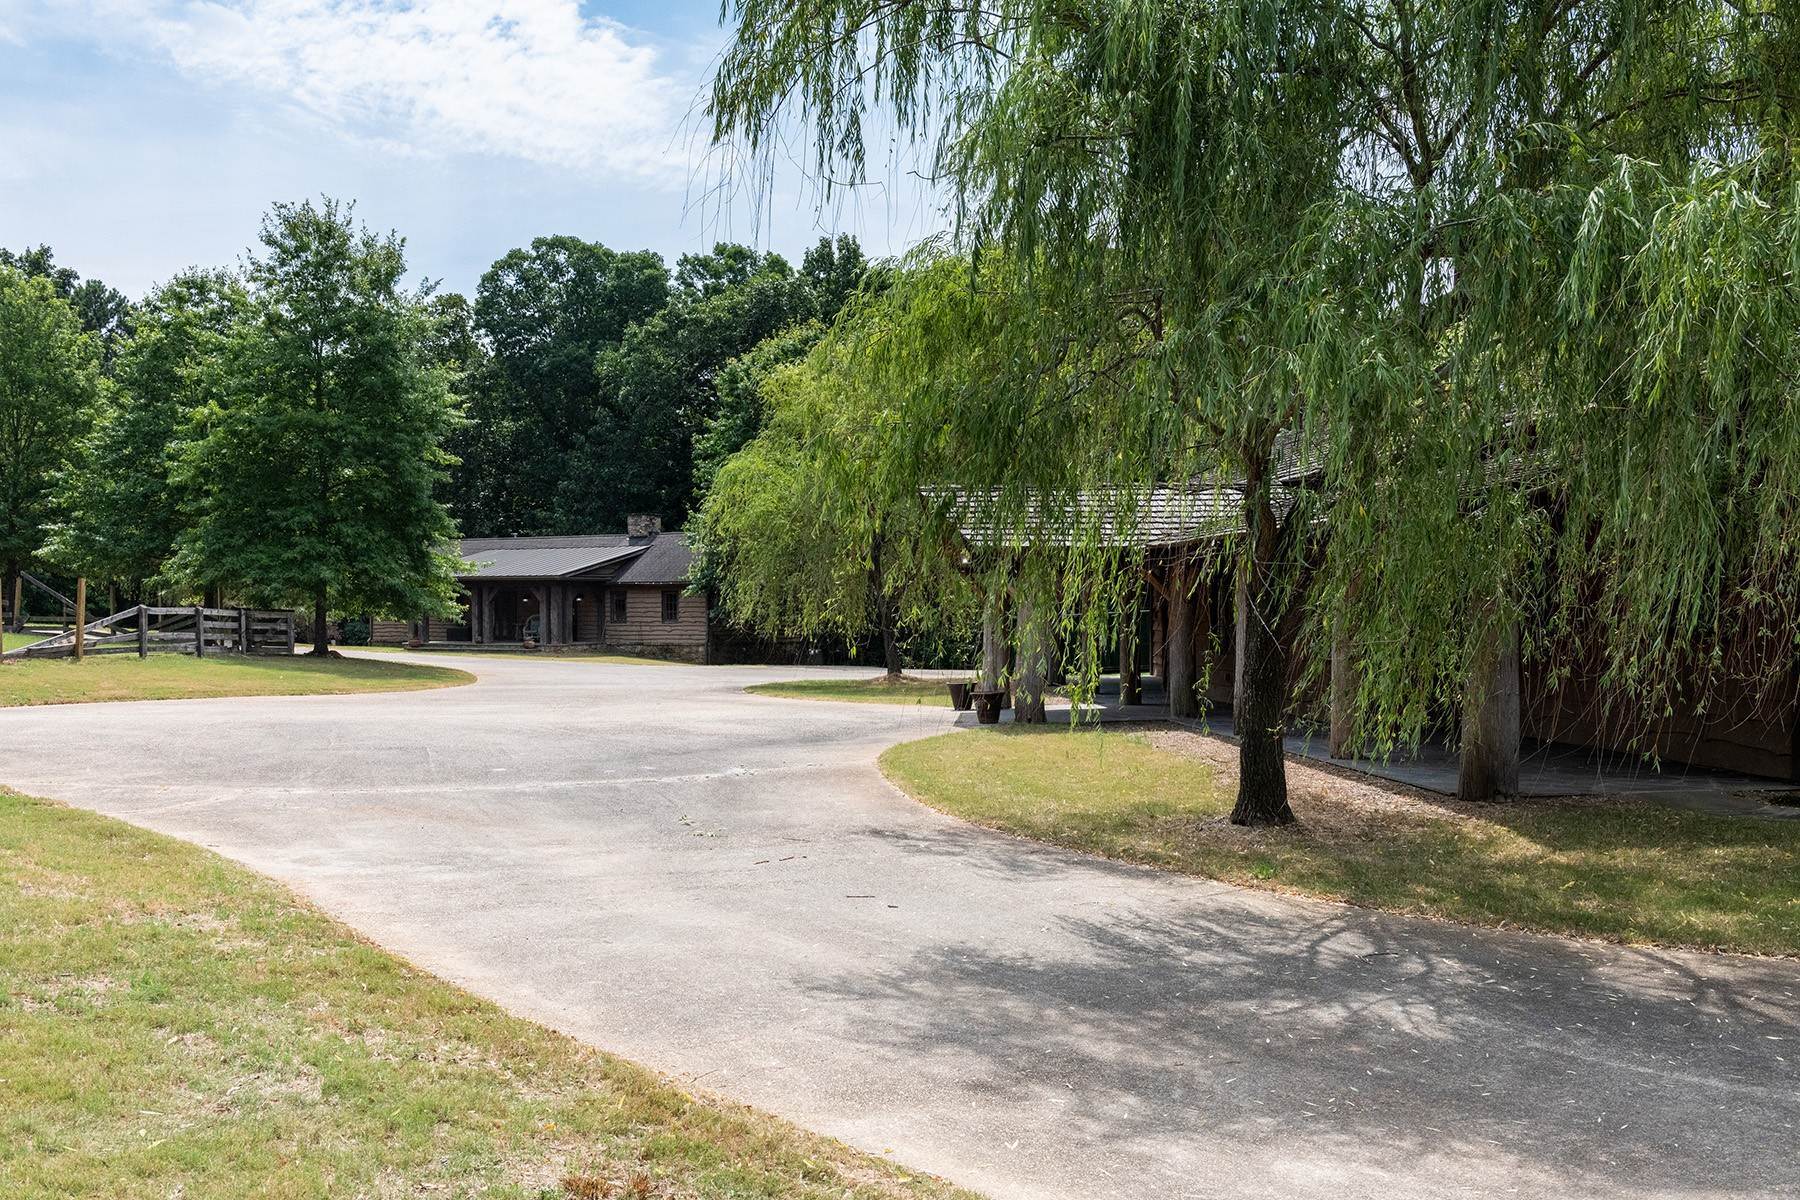 39. Farm and Ranch Properties for Sale at Equestrian Lovers Rare Opportunity 10290 Belladrum Drive Johns Creek, Georgia 30022 United States